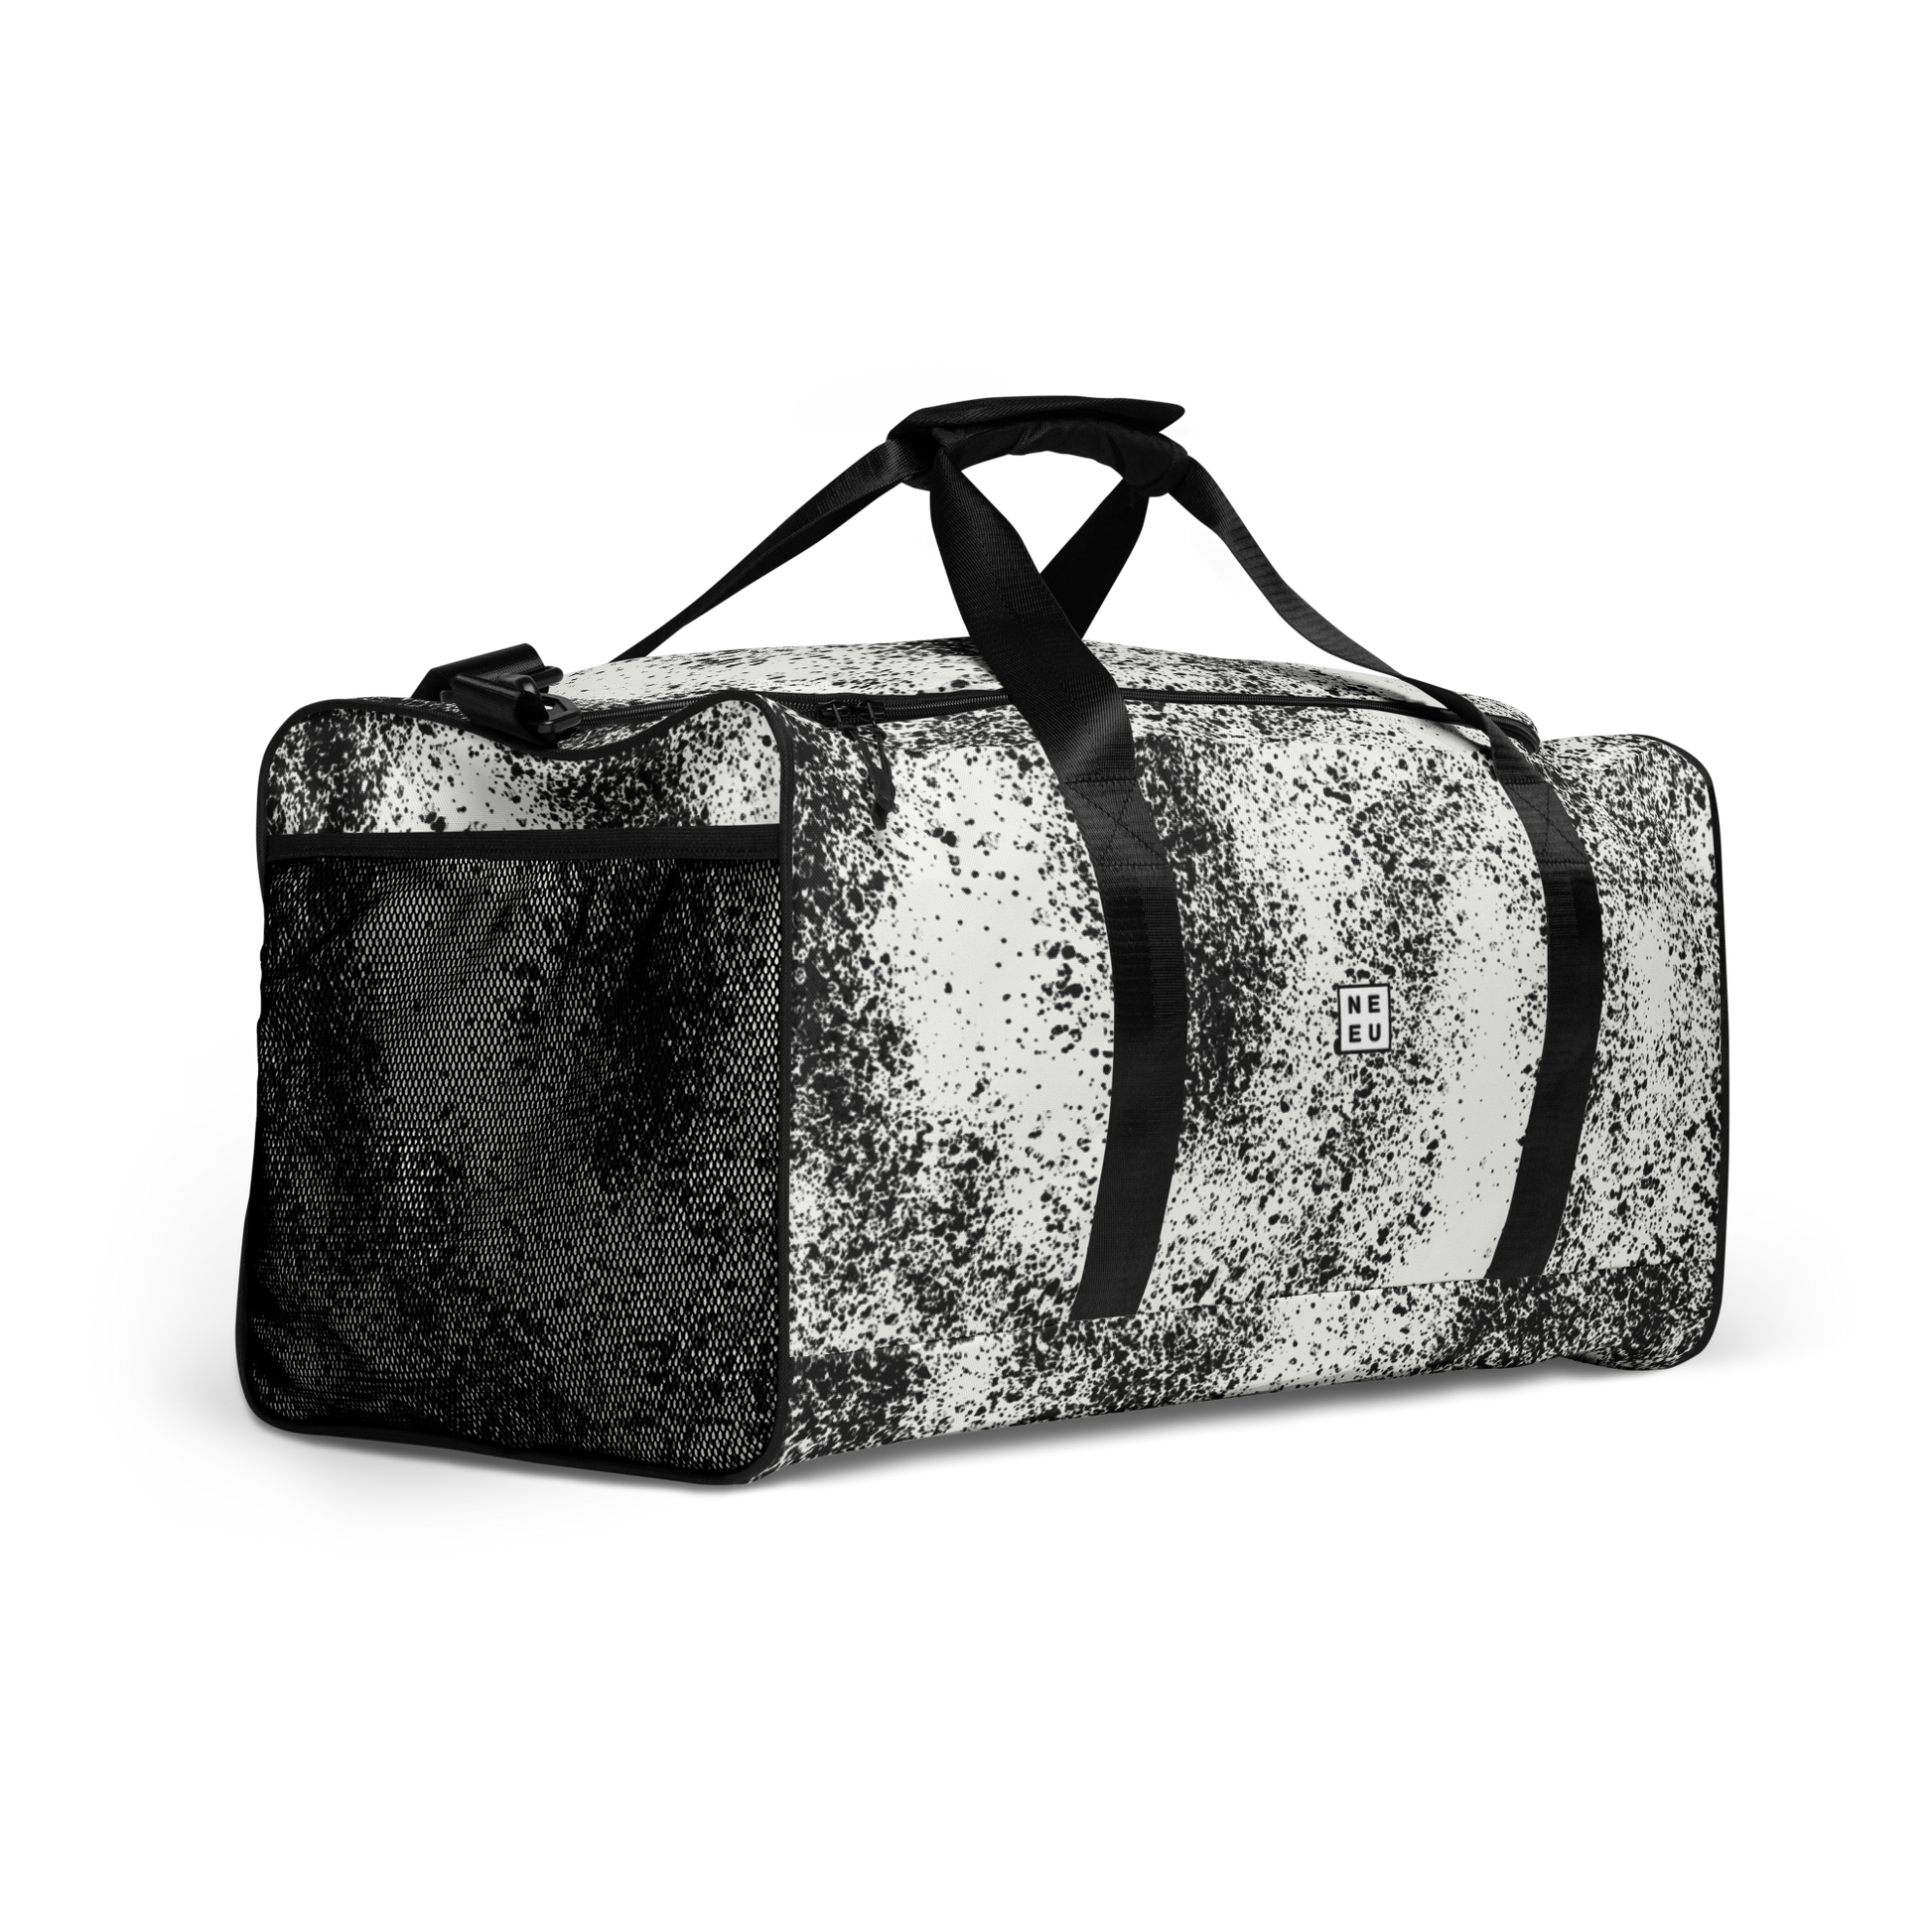 New City Adventure duffle bag in black and white speckle pattern 1/4 view